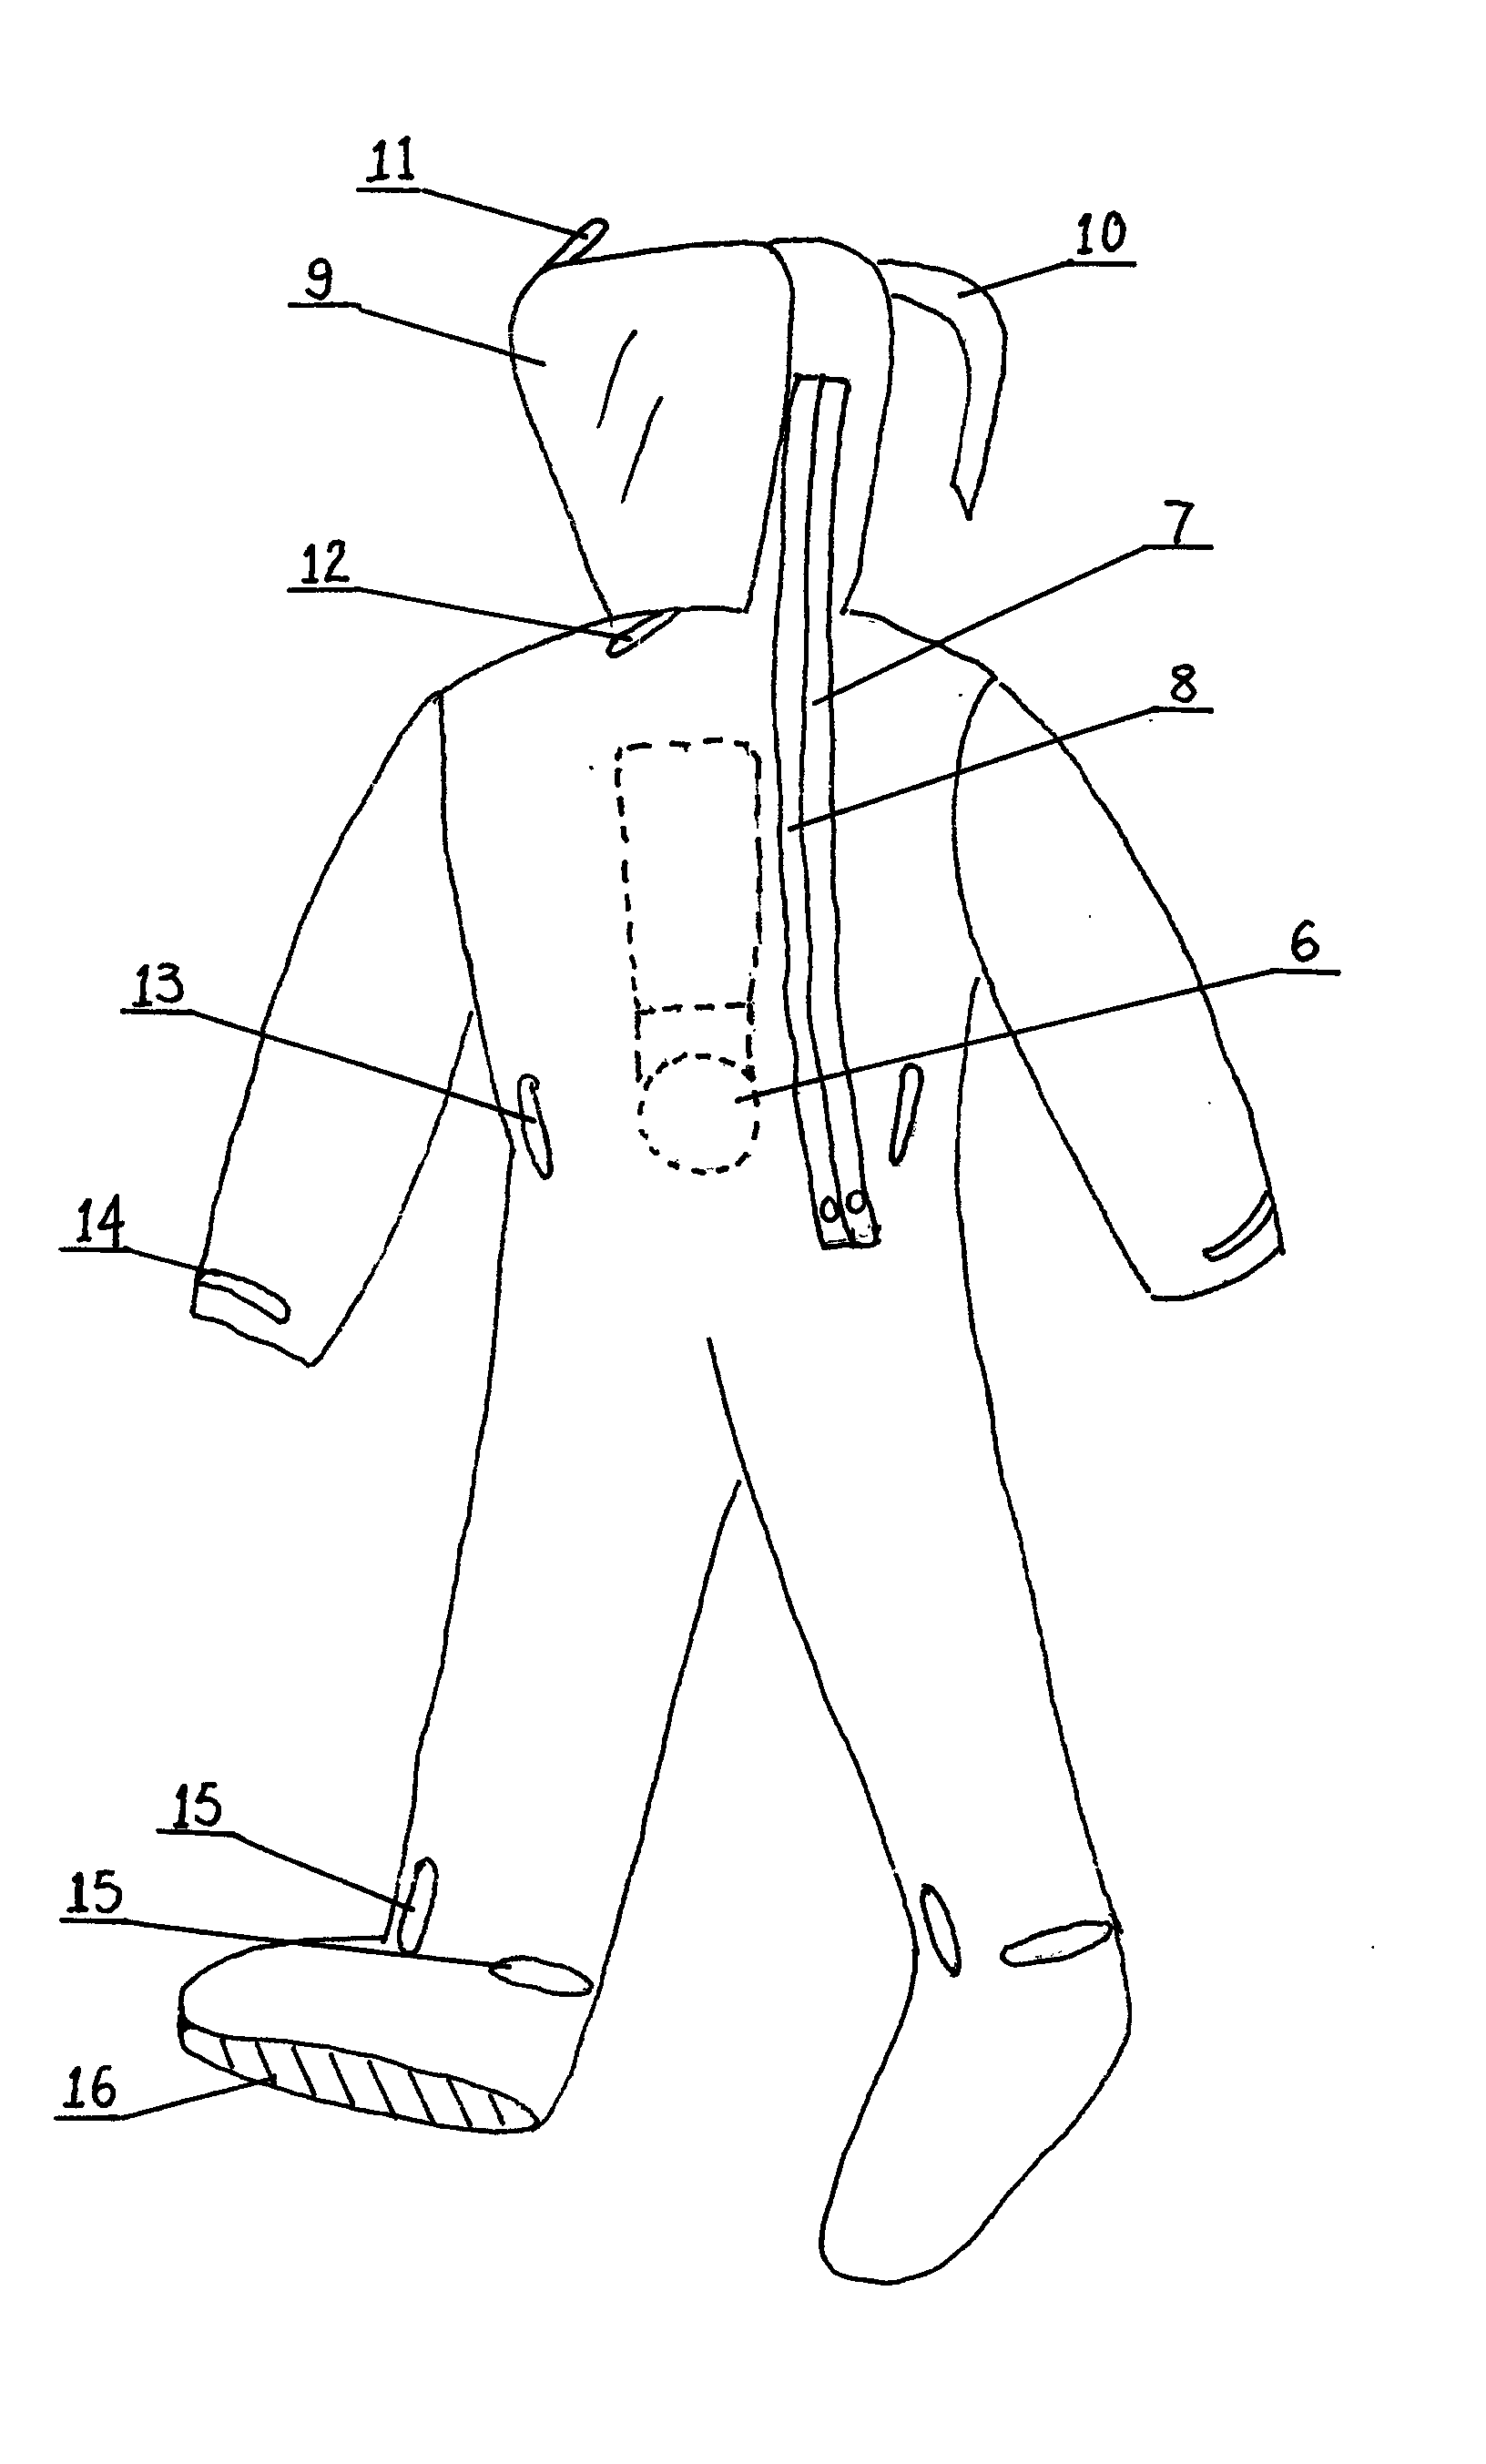 Enclosed integrated protective garment